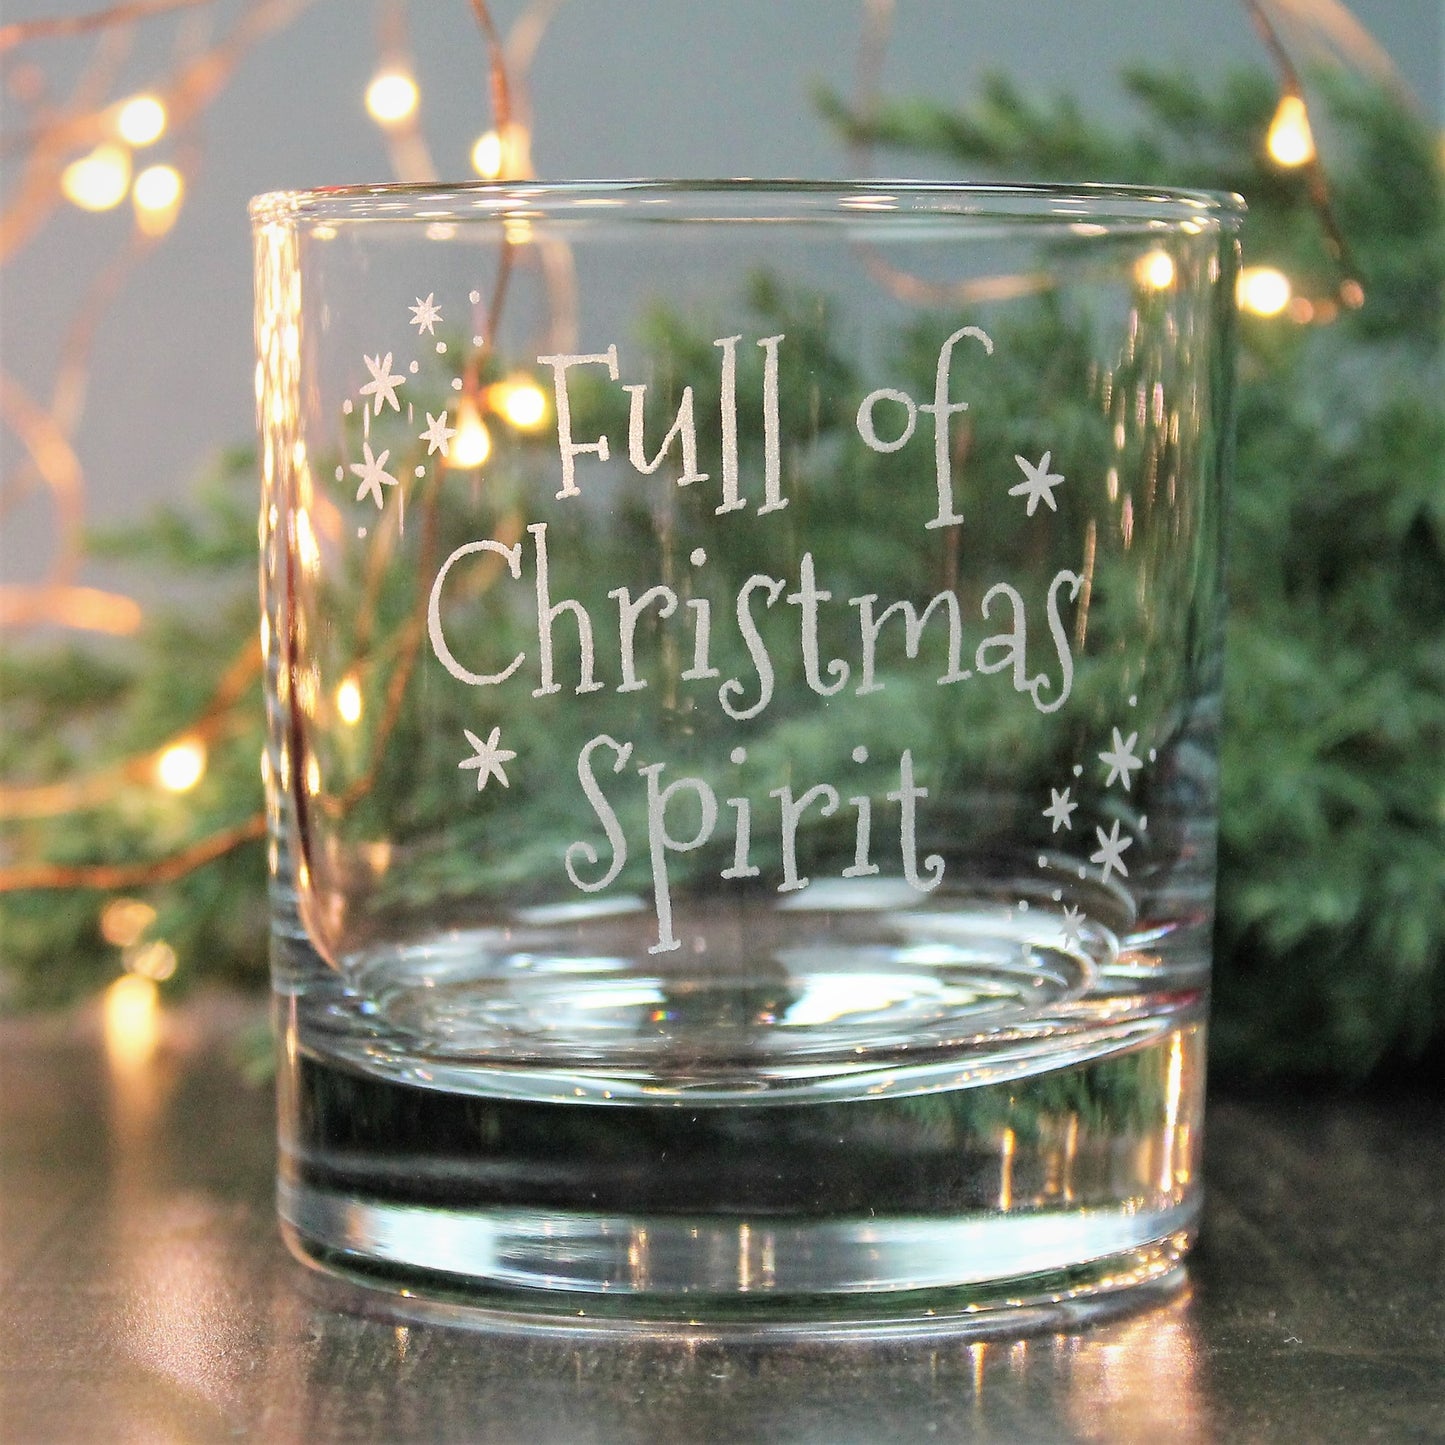 Whisky tumbler glass engraved with the words - full of Christmas spirit.